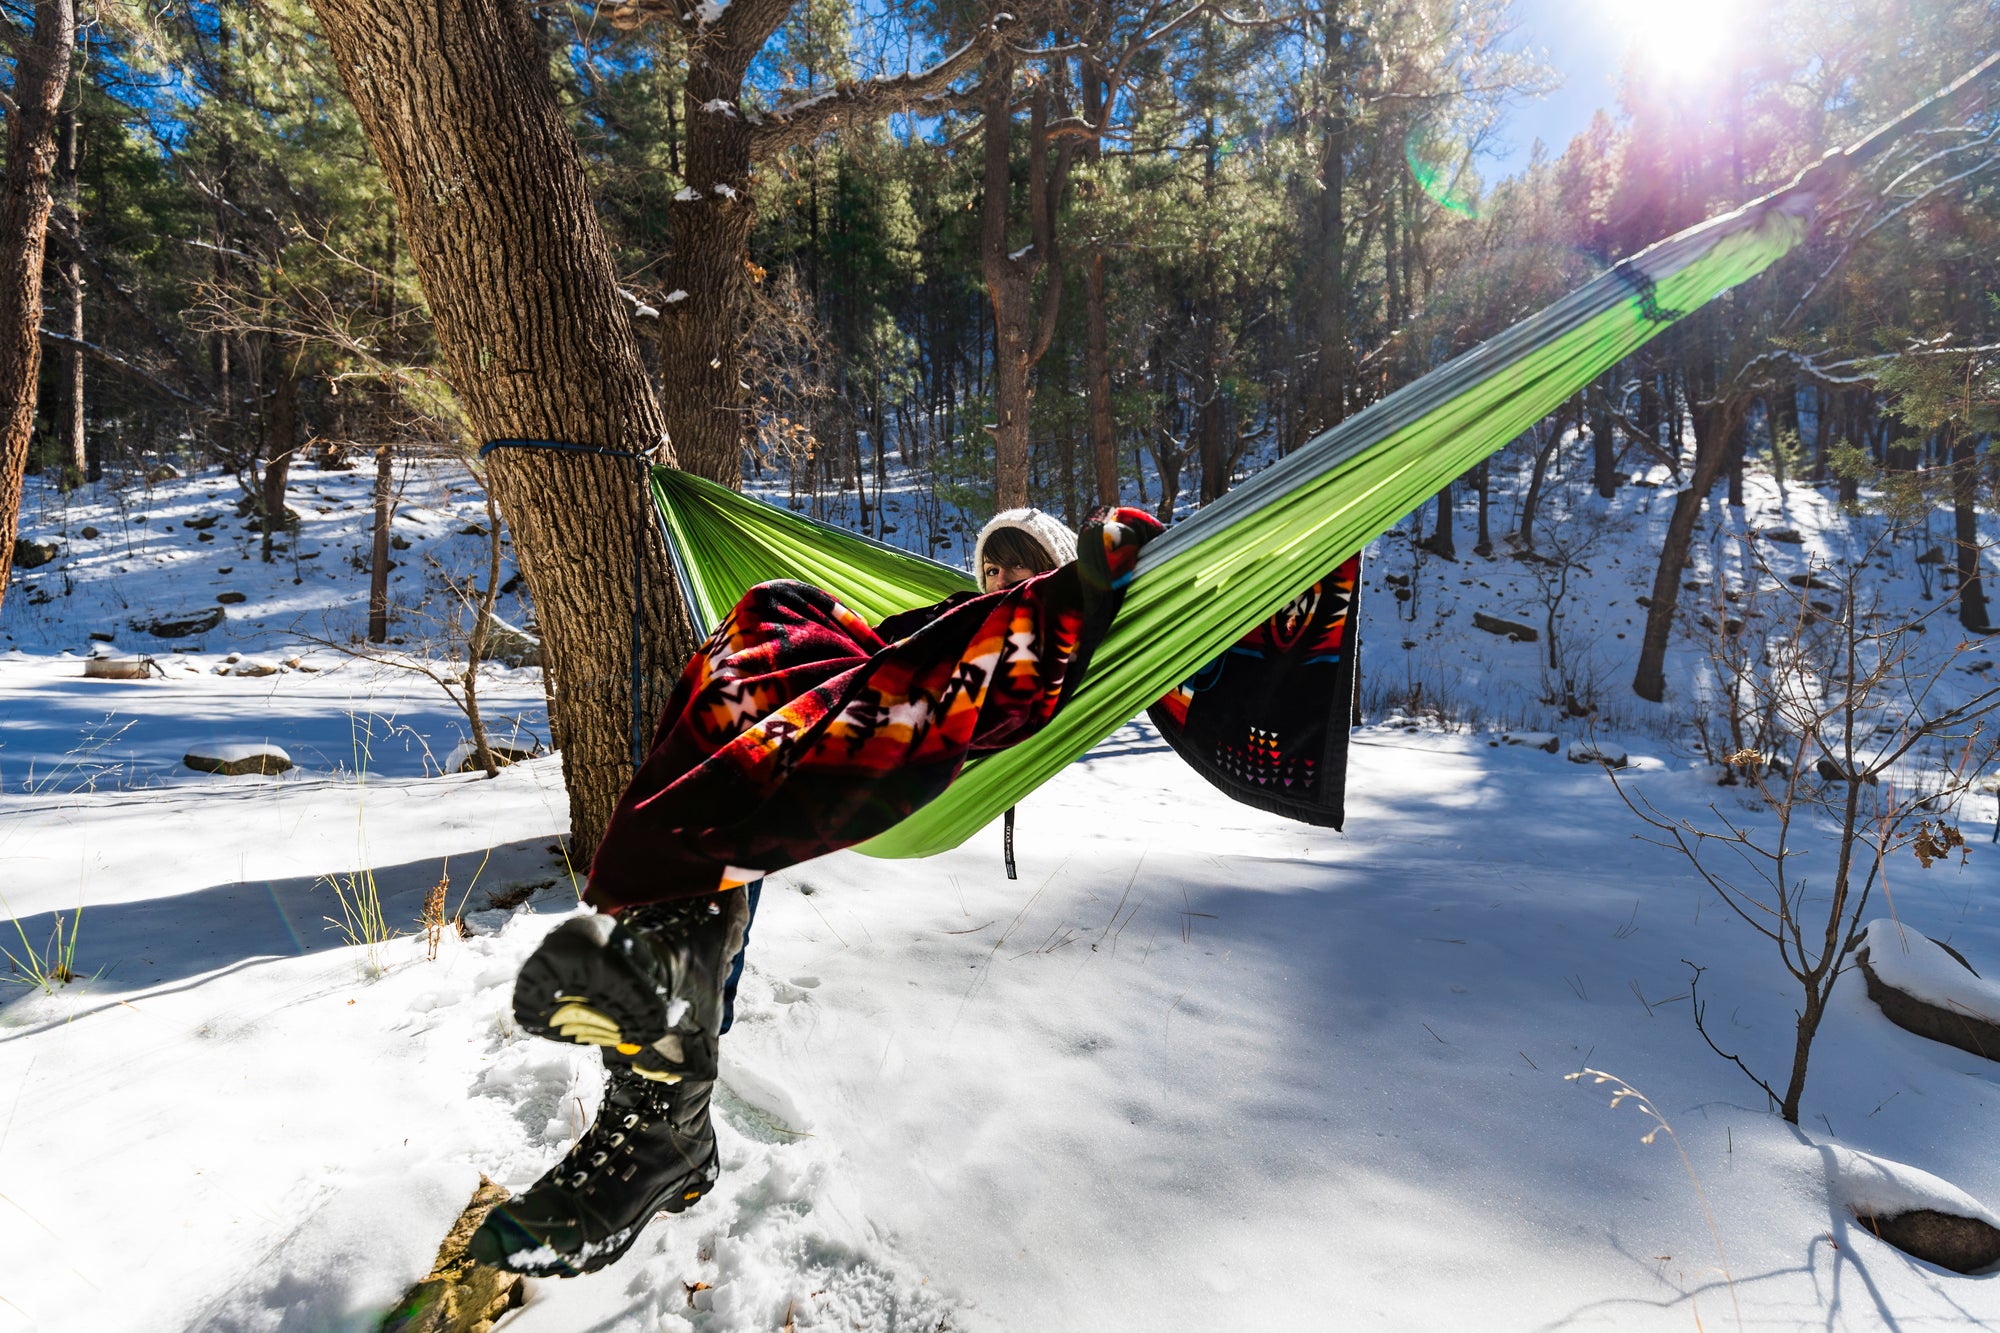 A woman bundled up in a red blanket sitting in a hammock in a snowy forest.